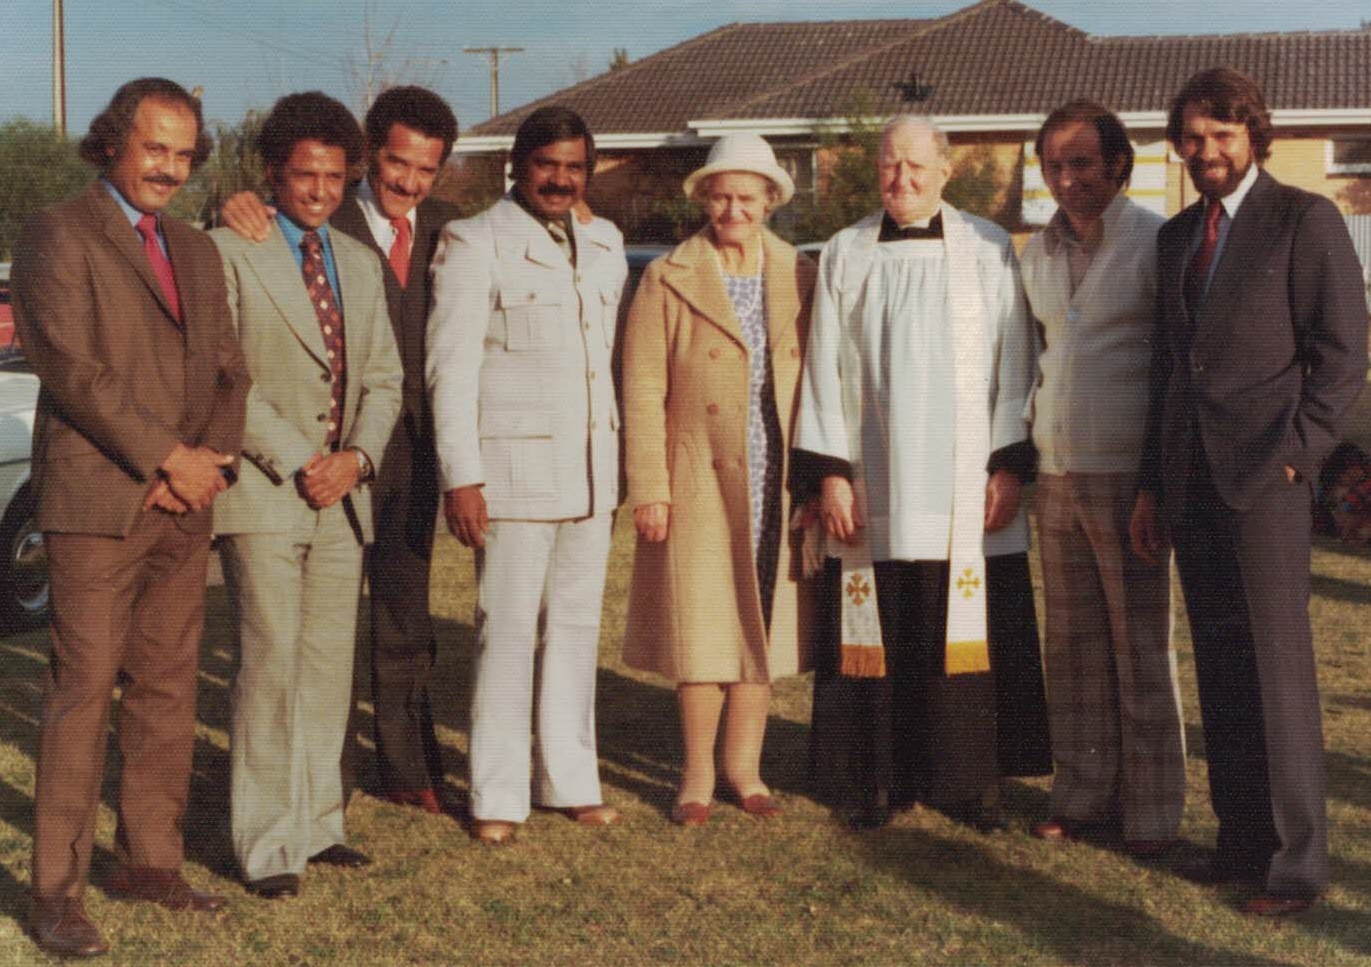 St Francis House boys Desmond Price, John Moriarty, Charles Perkins, Vincent Copley, Isabel Smith, Percy Smith, Les Nayda and Gordon Briscoe at the 1976 baptism of Vincent Copley Junior